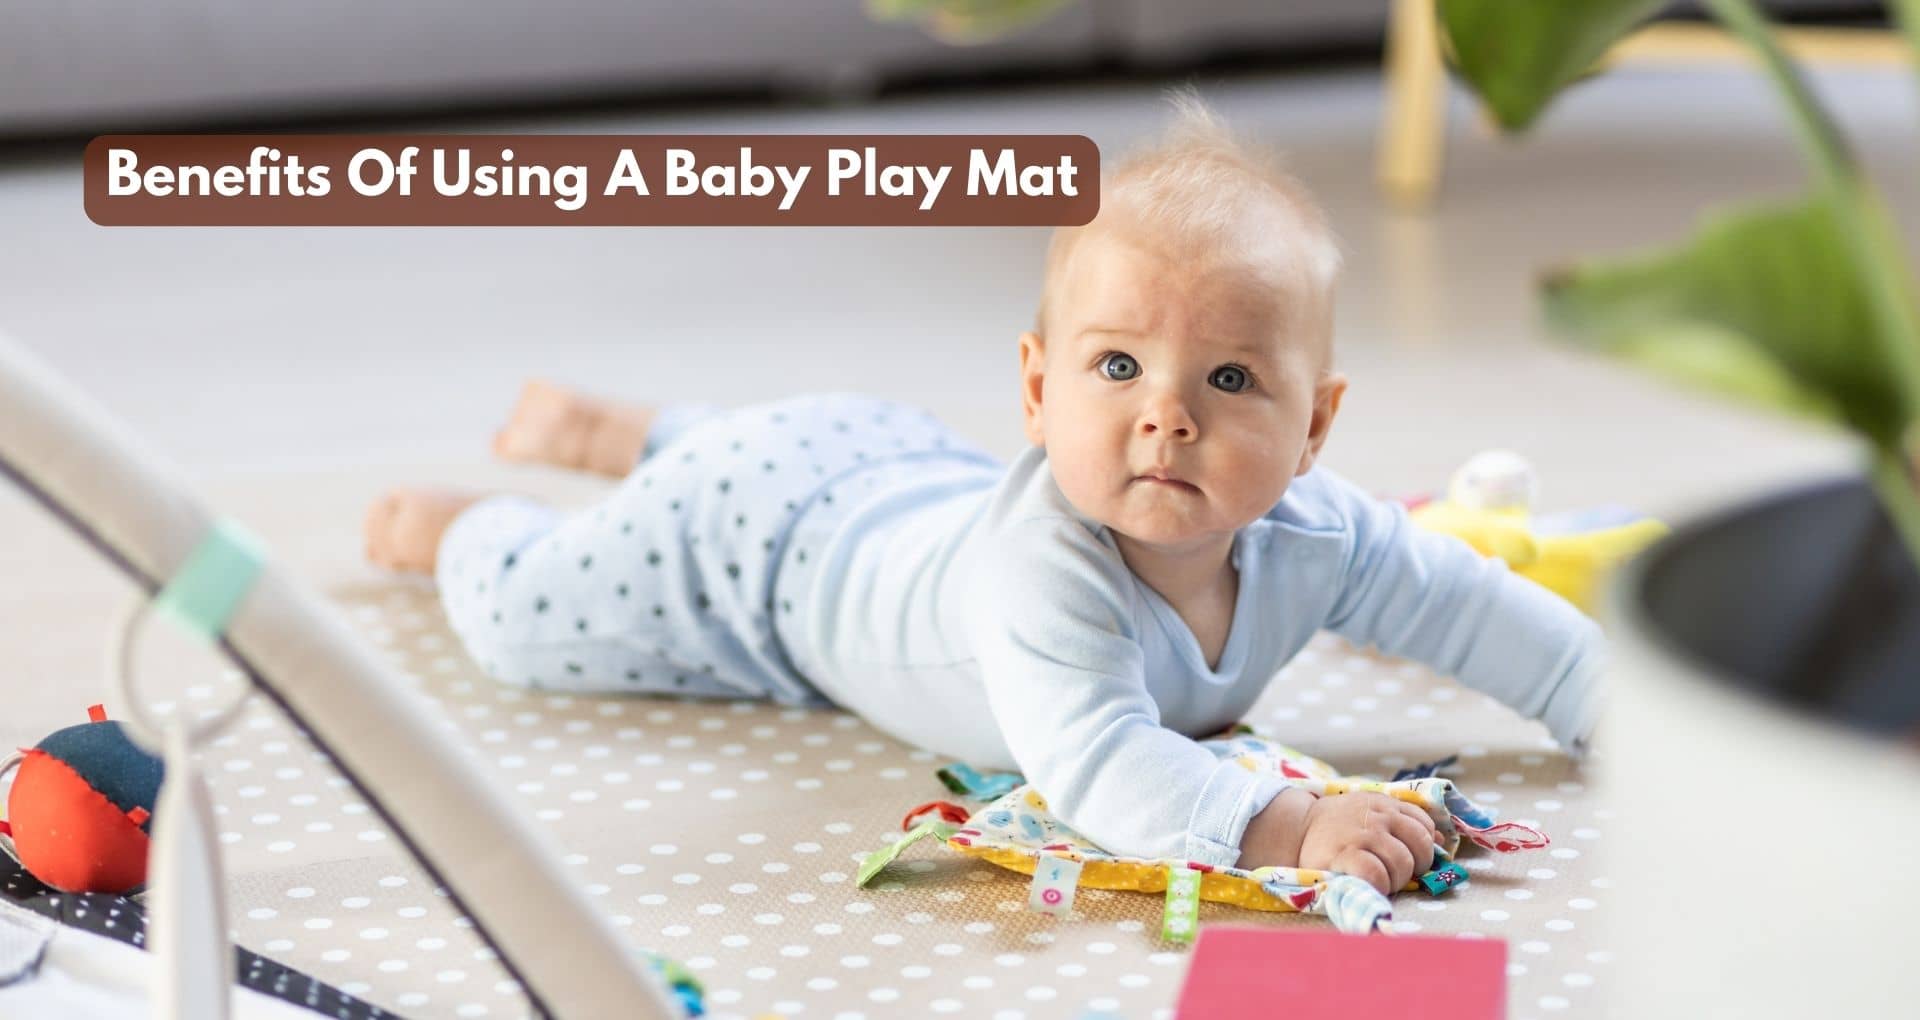 What Are The Benefits Of Using A Baby Play Mat